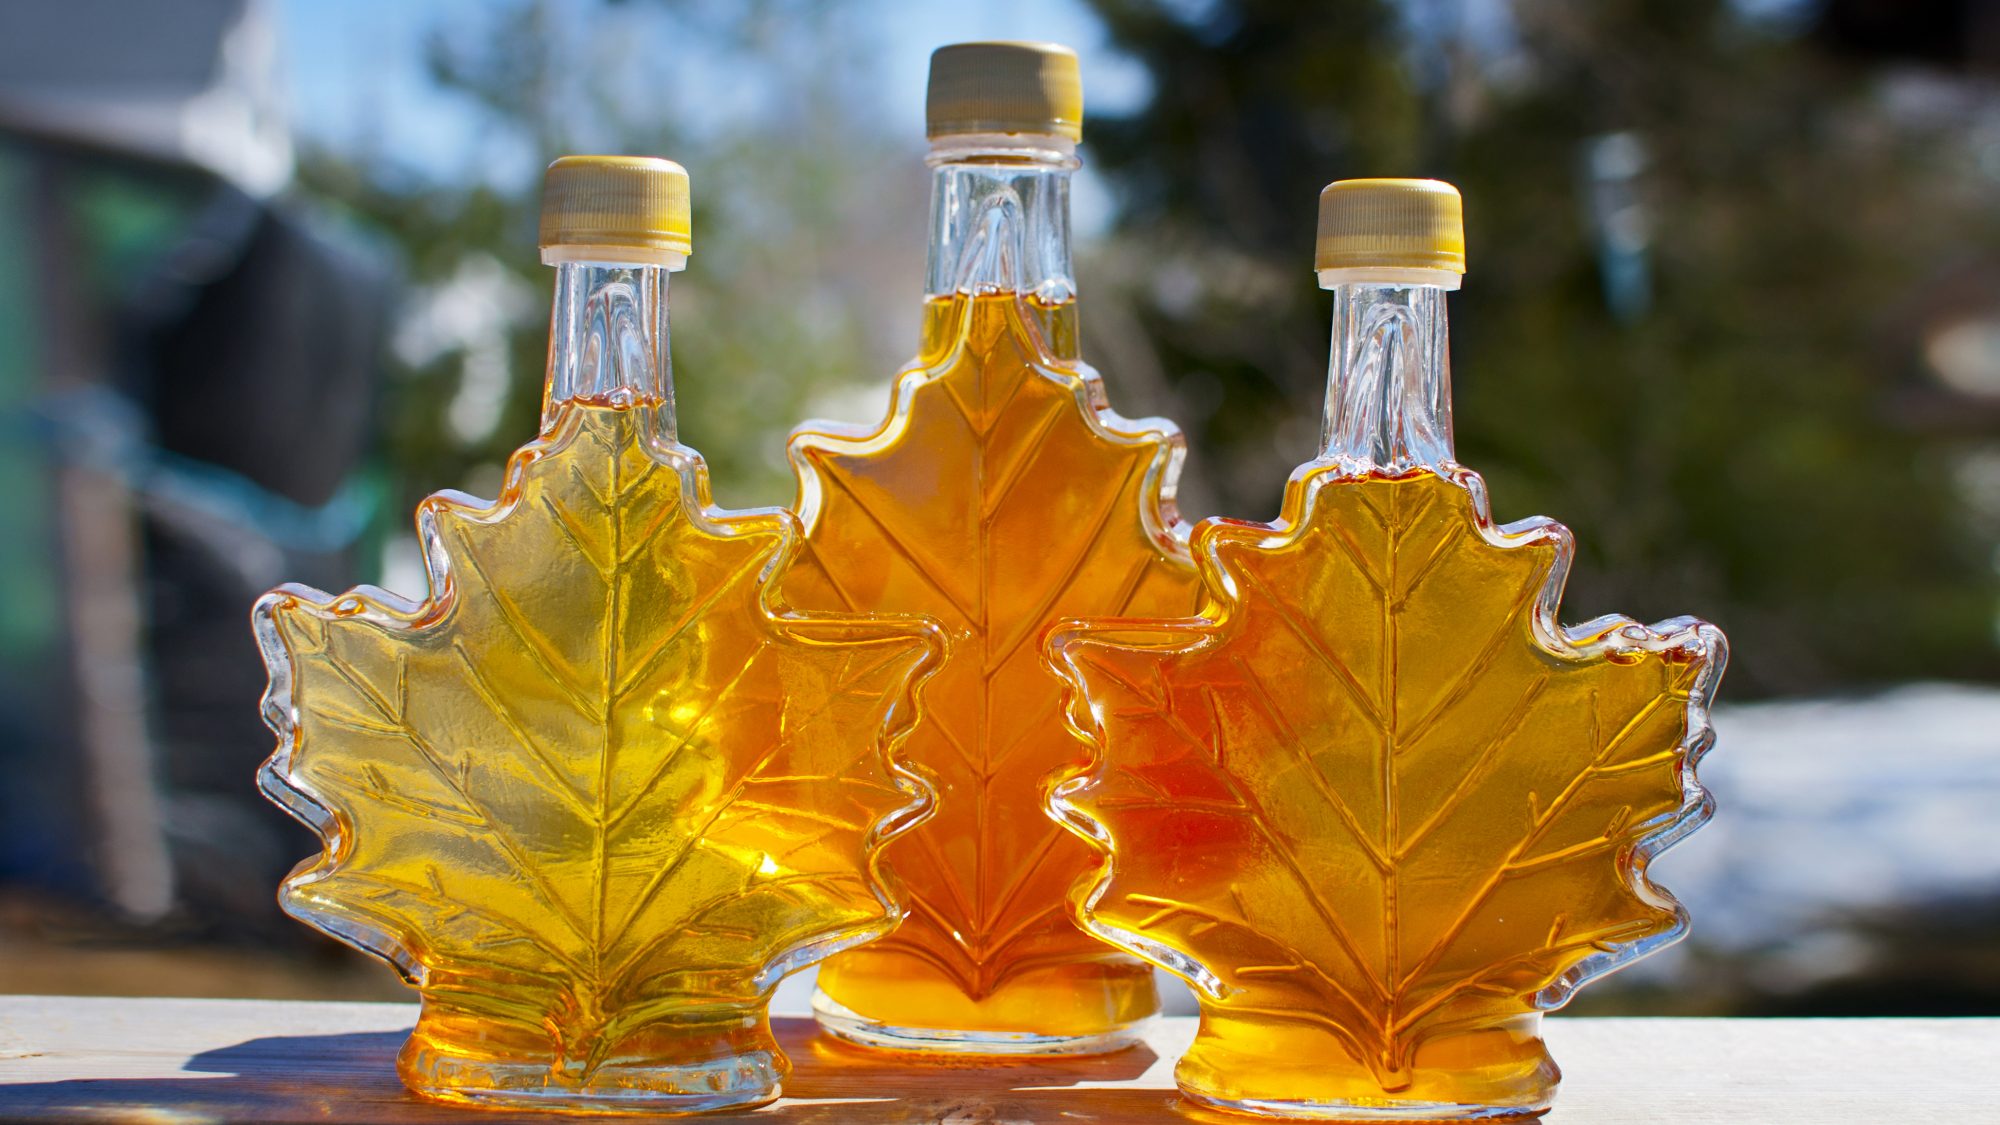 How to Store Maple Syrup? Learn the Best 4 Ideas for Storage